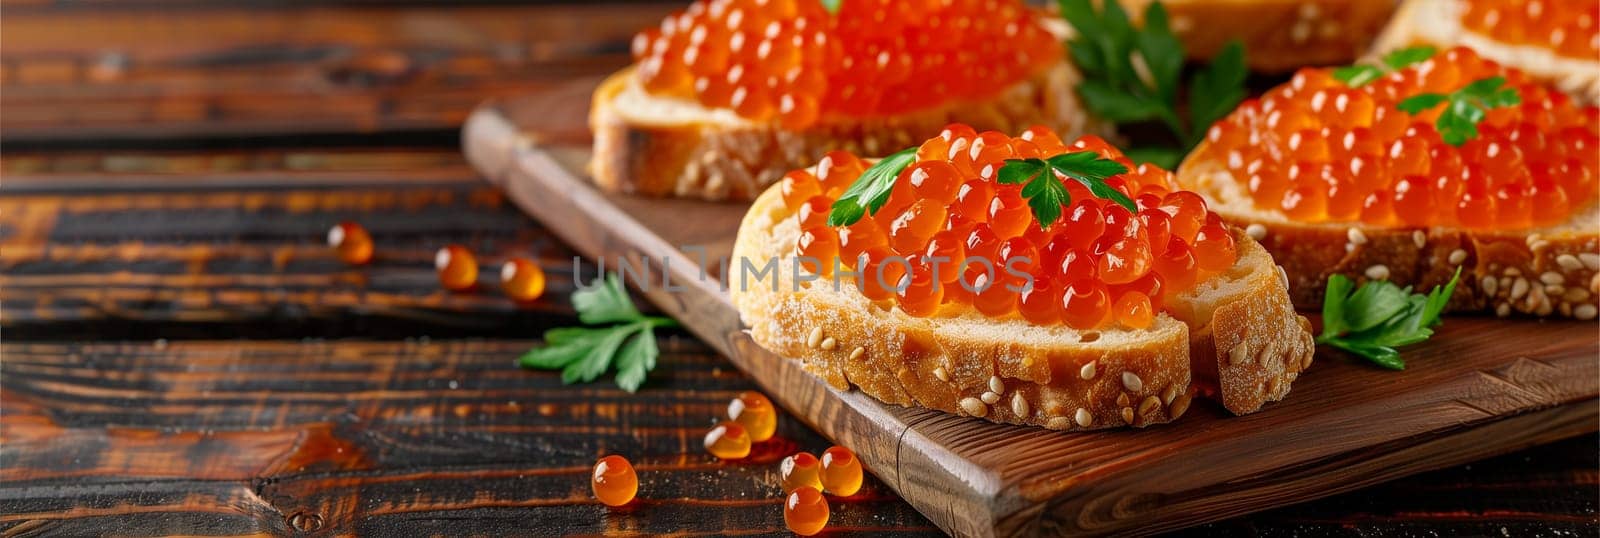 A wooden plate holds bread topped with rich red caviar, creating a savory and indulgent gourmet snack.